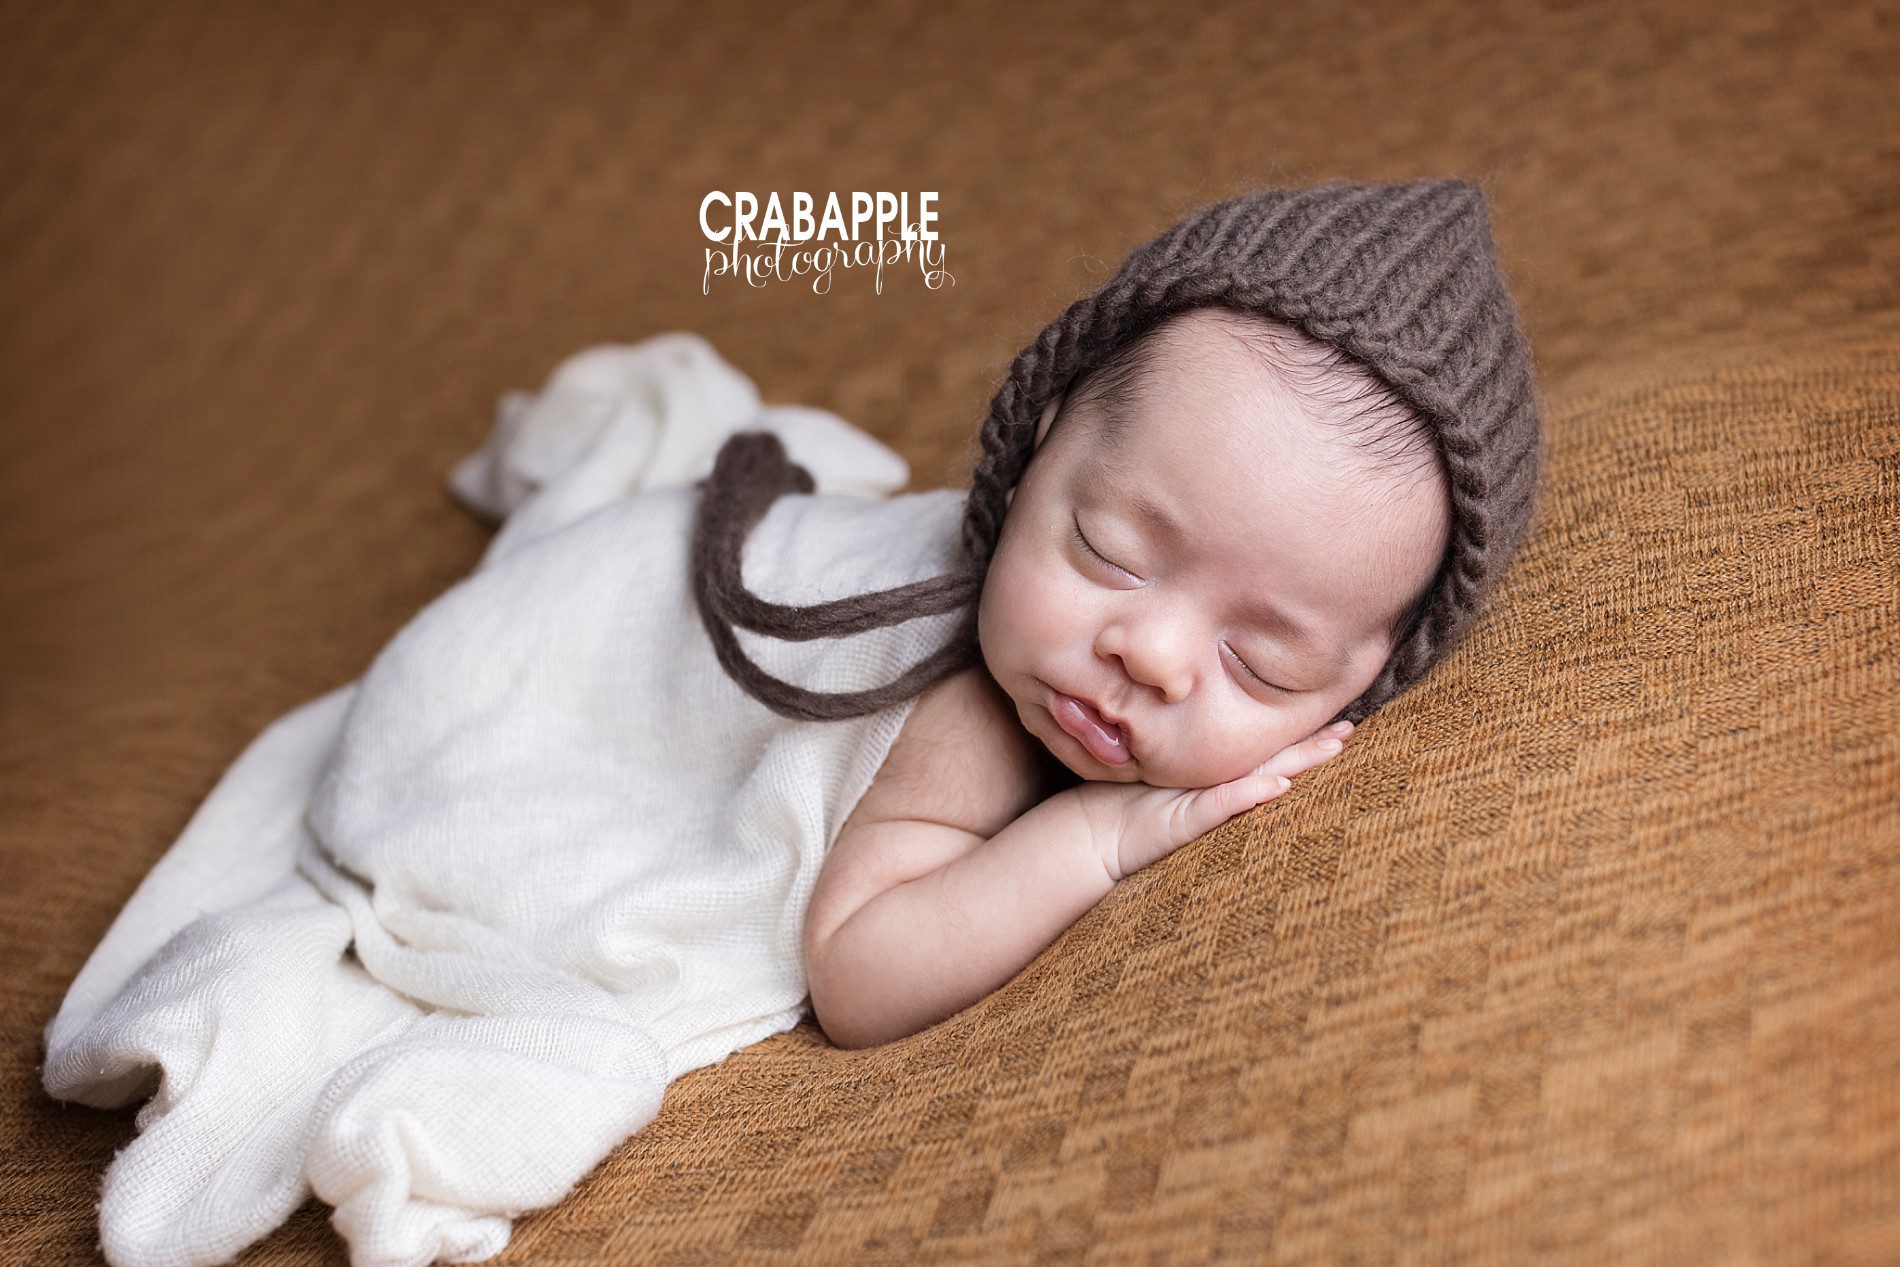 ideas for styling newborn pics using shades of brown